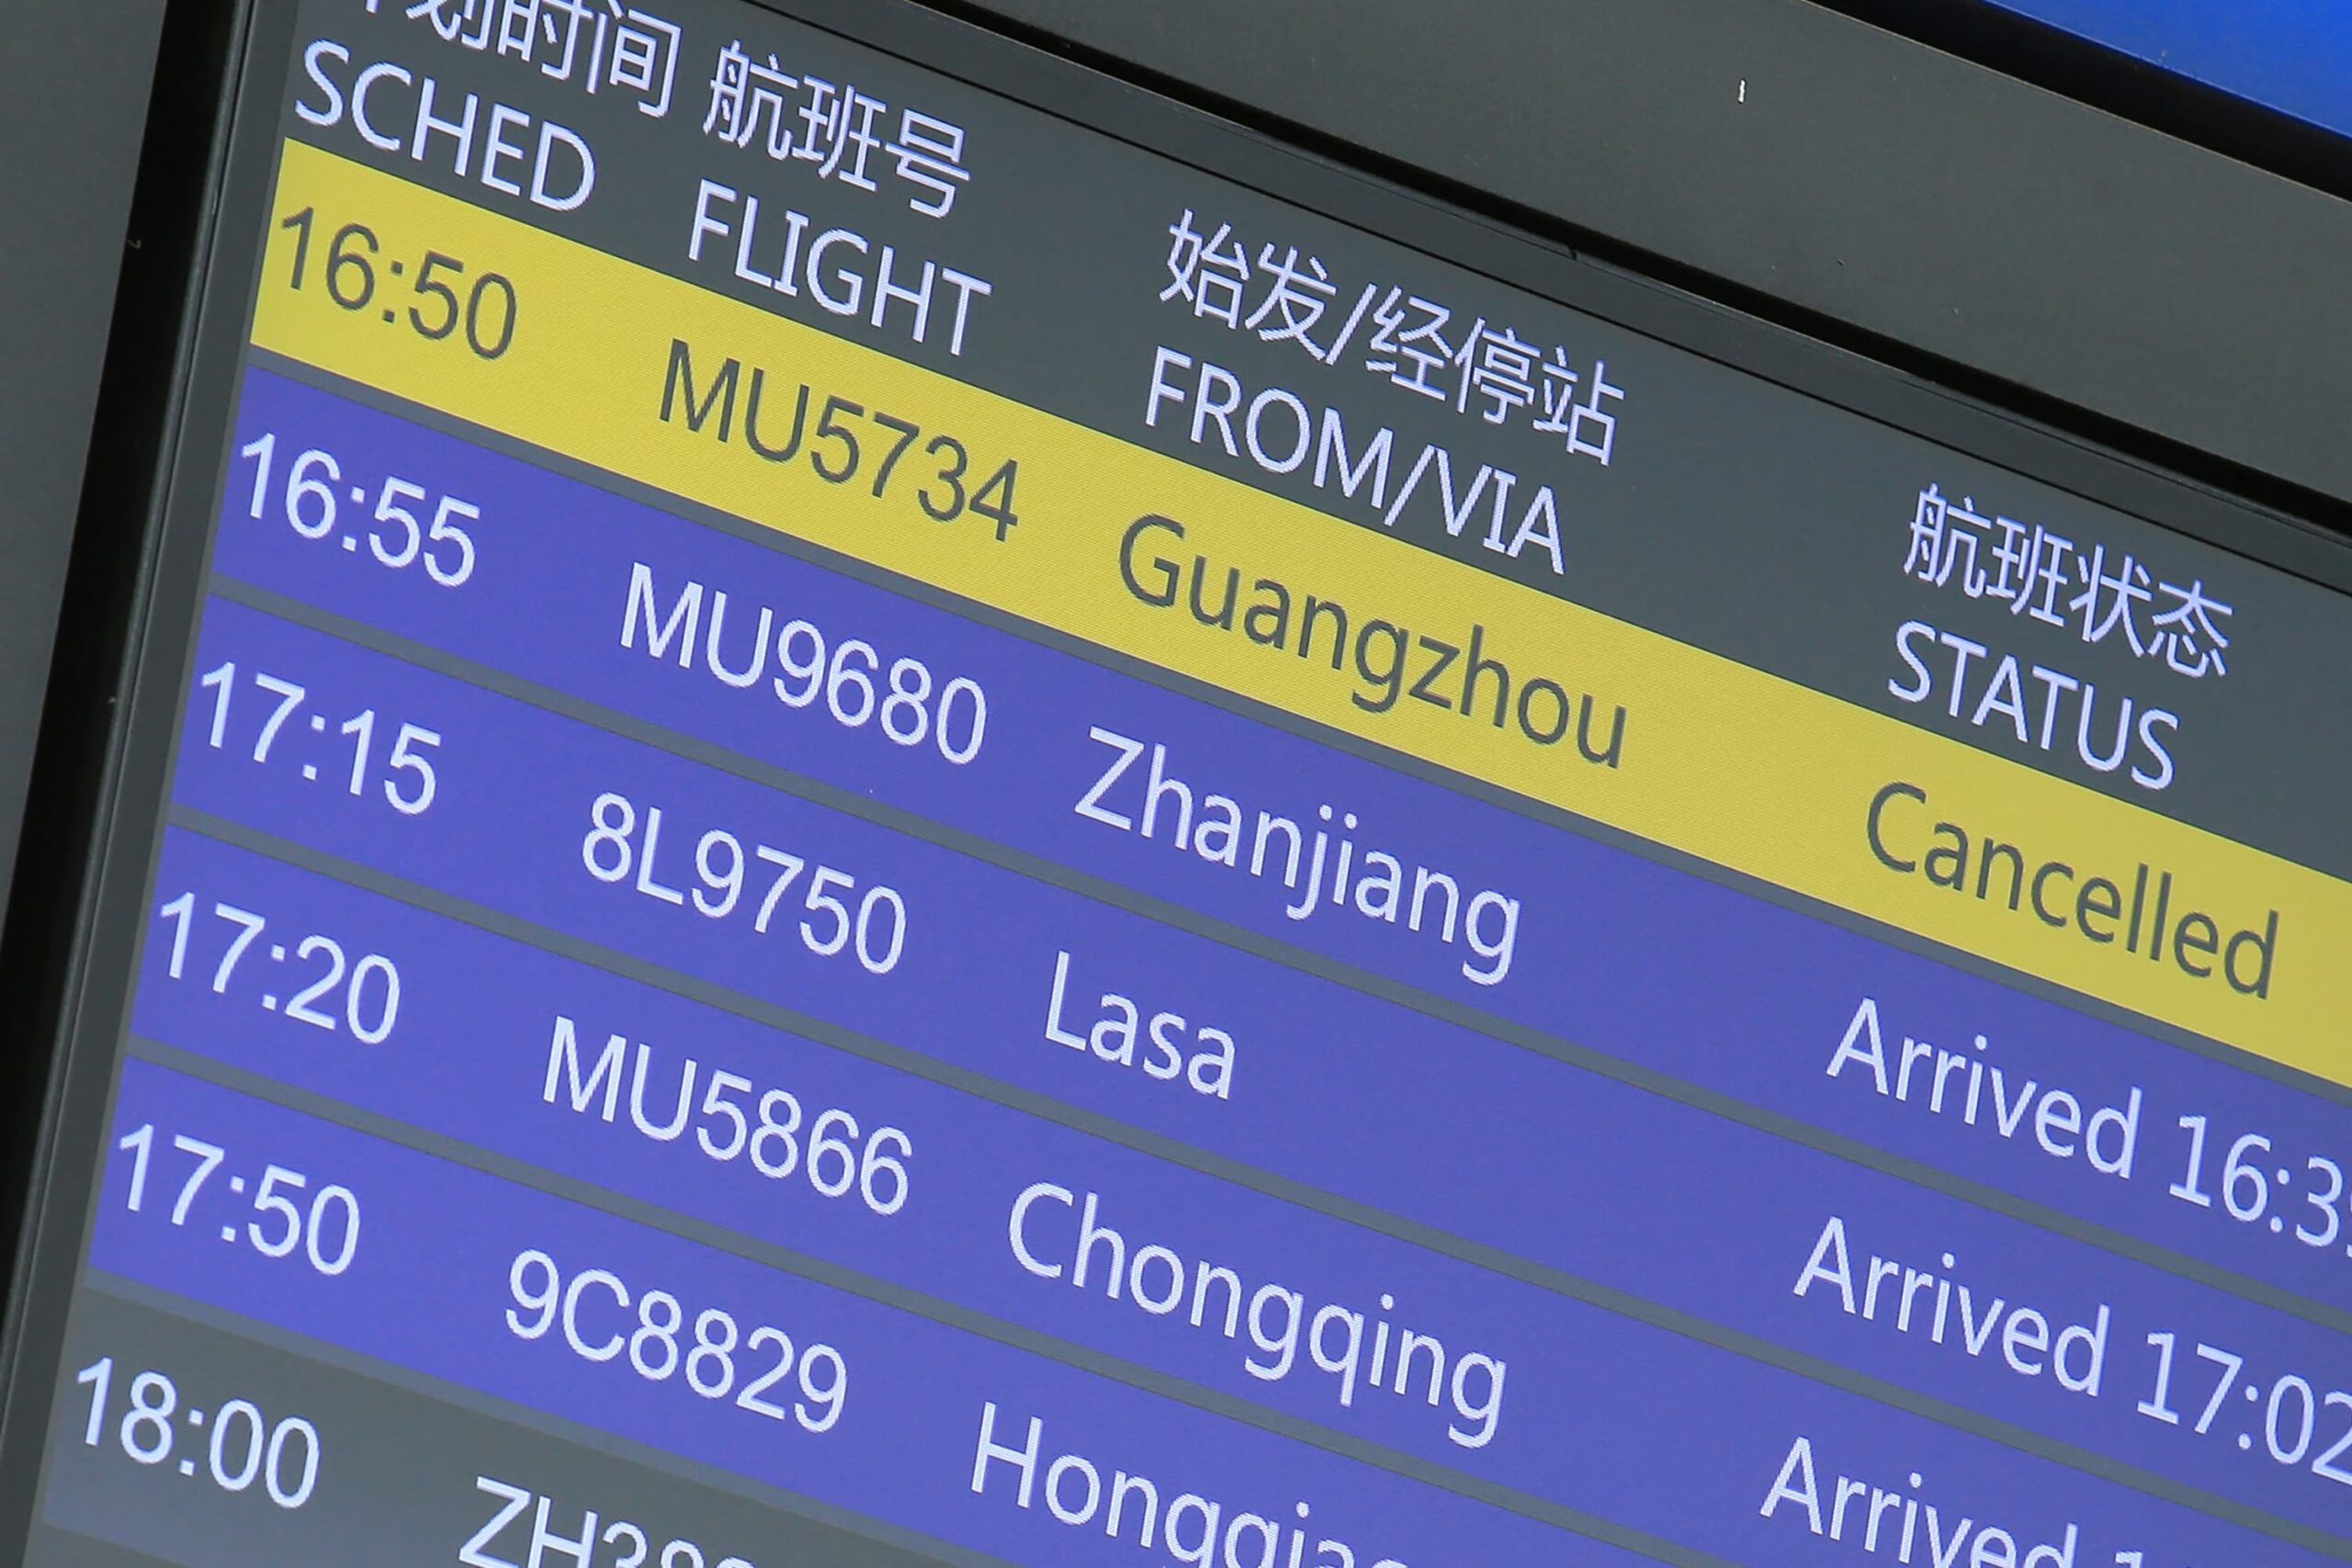 The US is suspending 26 Chinese flights in response to the cancellation of flights in China